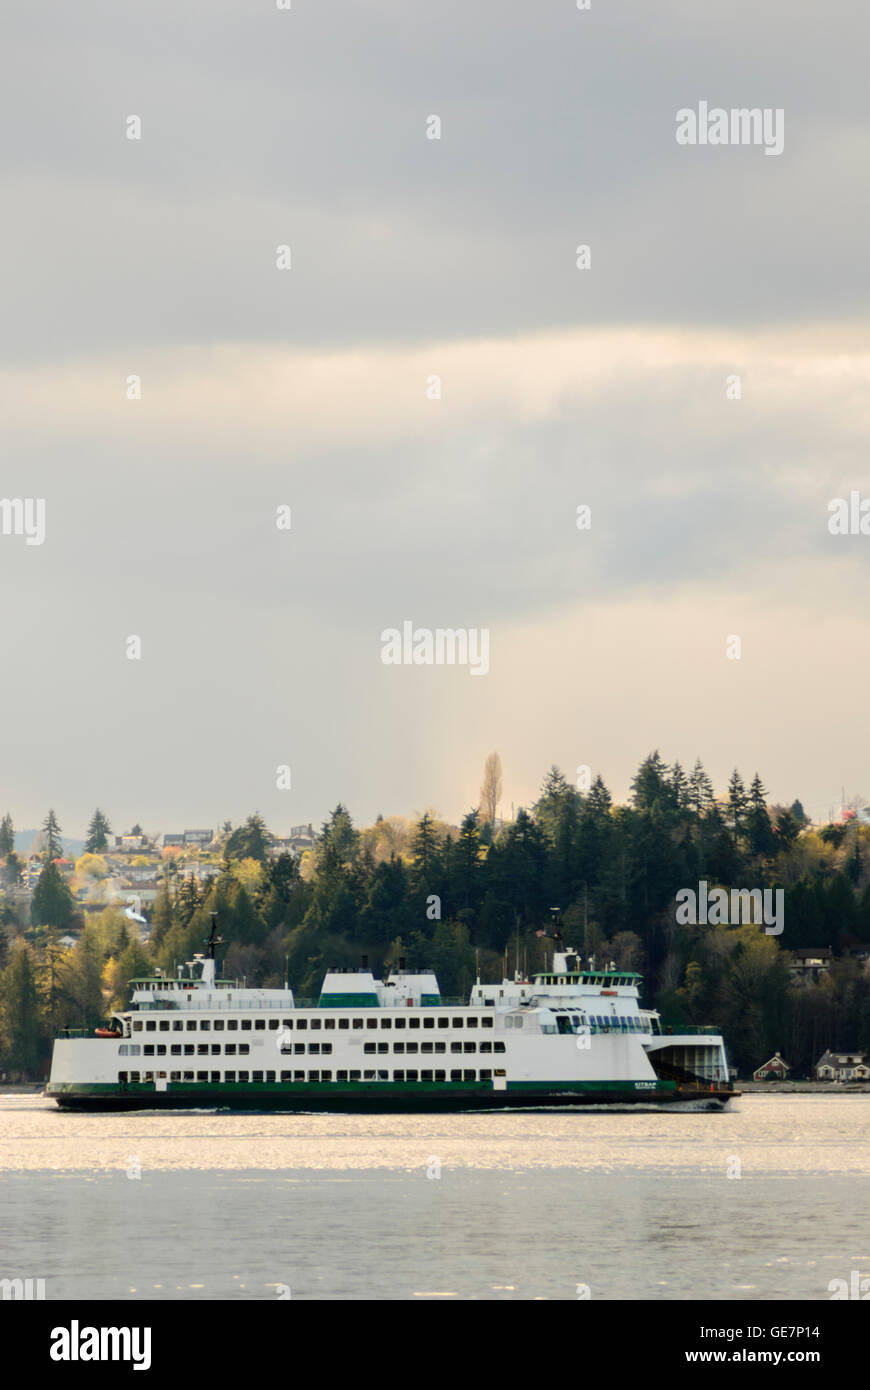 The MV Kitsap ferry sailing between Seattle and Bremerton.  Bainbridge Island is in the background. Stock Photo